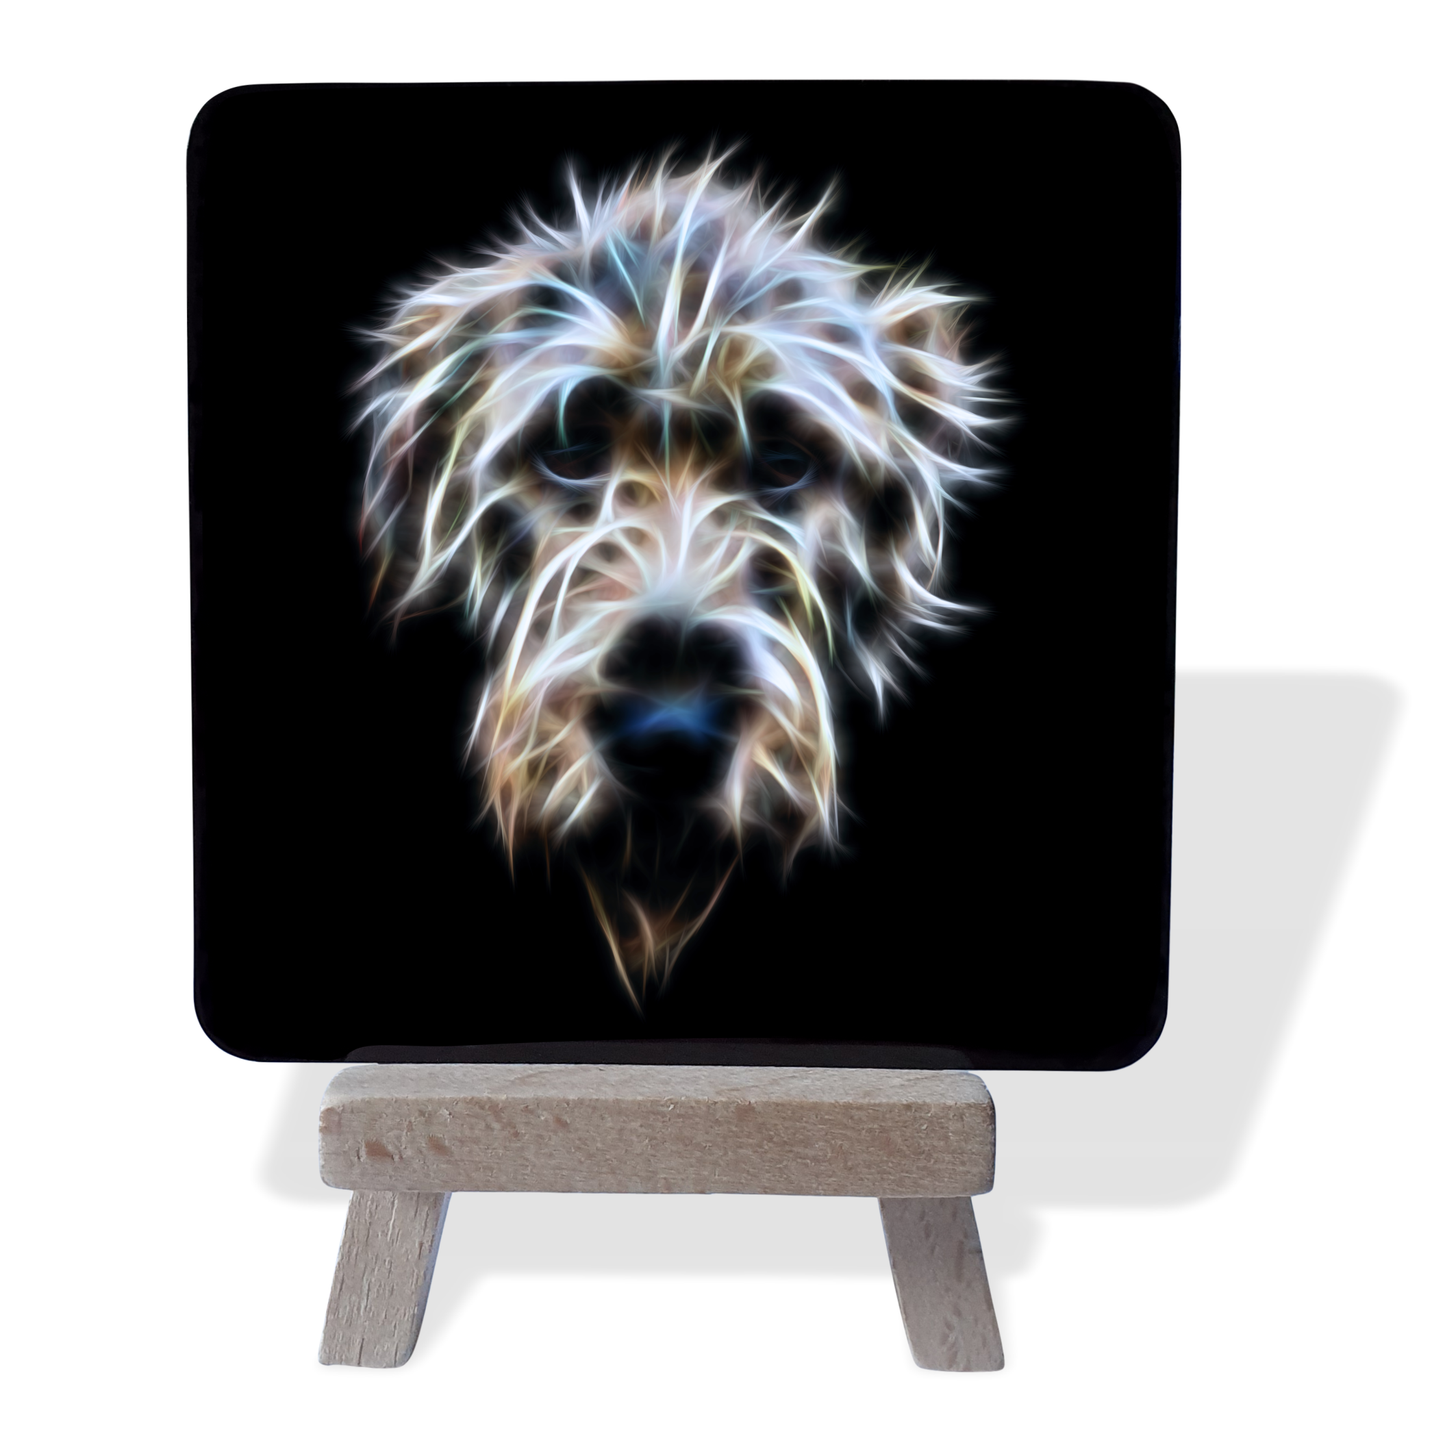 Irish Wolfhound #1 Metal Plaque and Mini Easel with Fractal Art Design